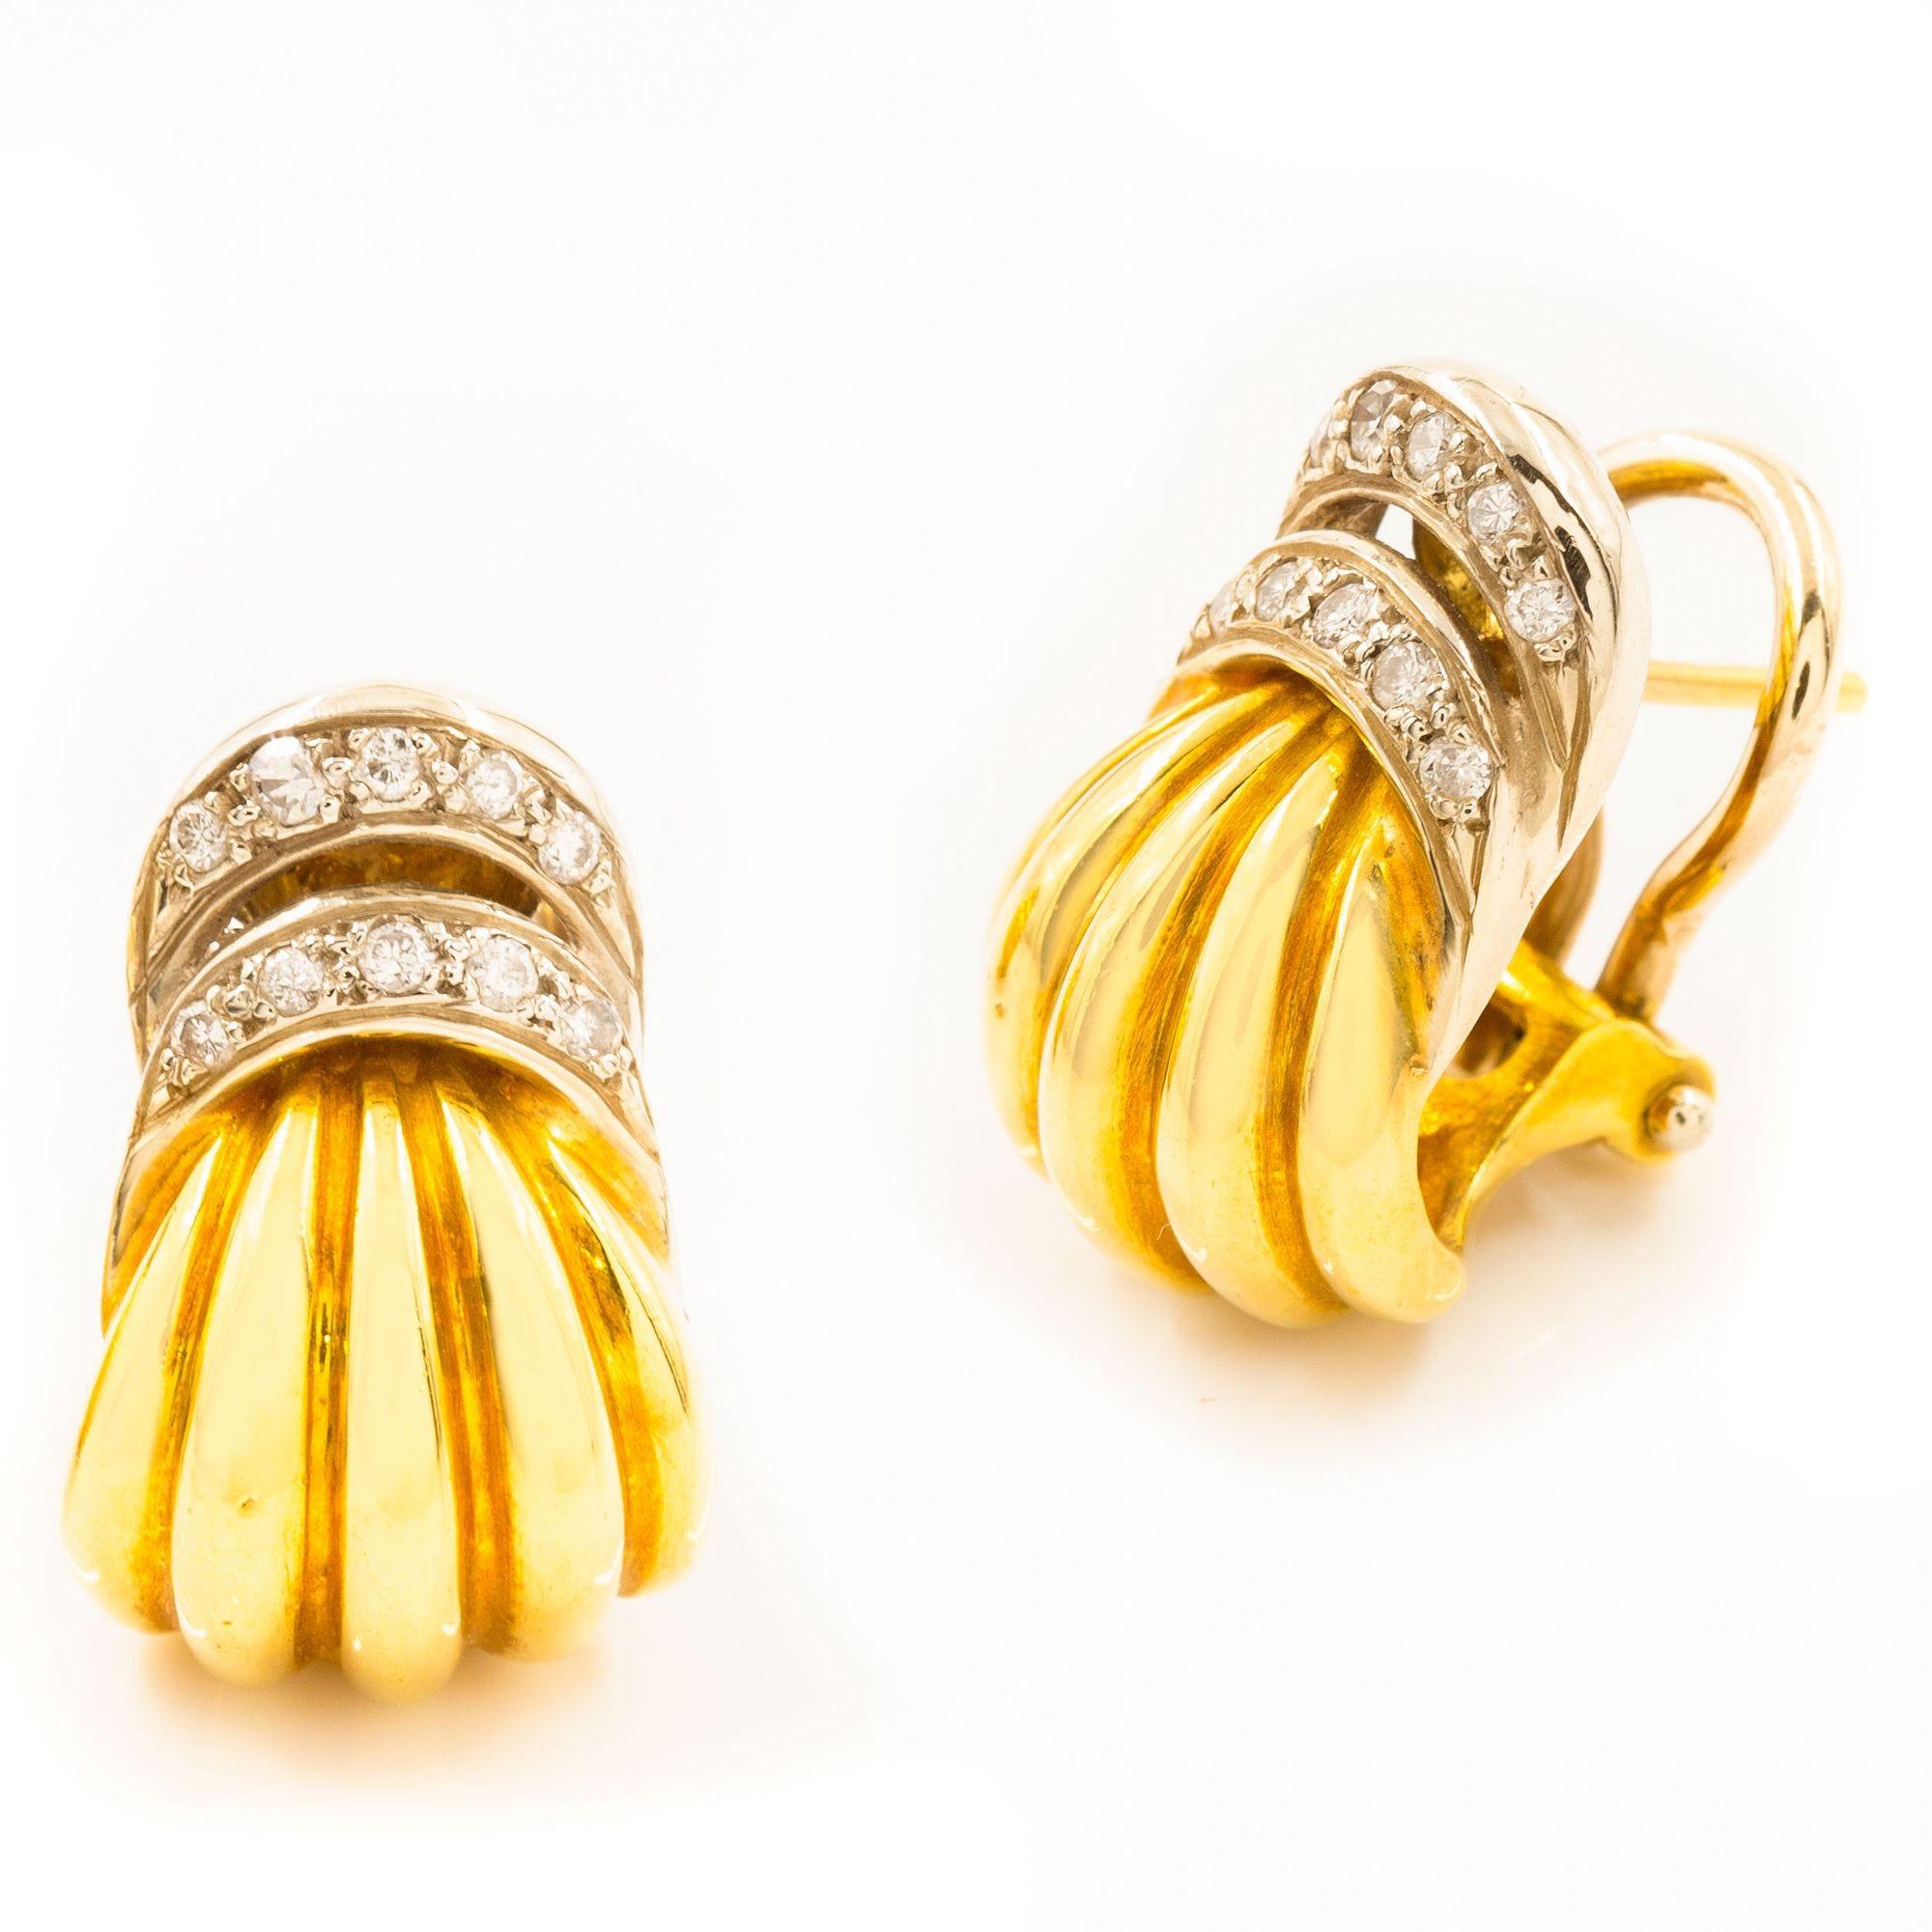 20th Century Pair of 18K Yellow Gold & Gemstone Swirl Earrings For Sale